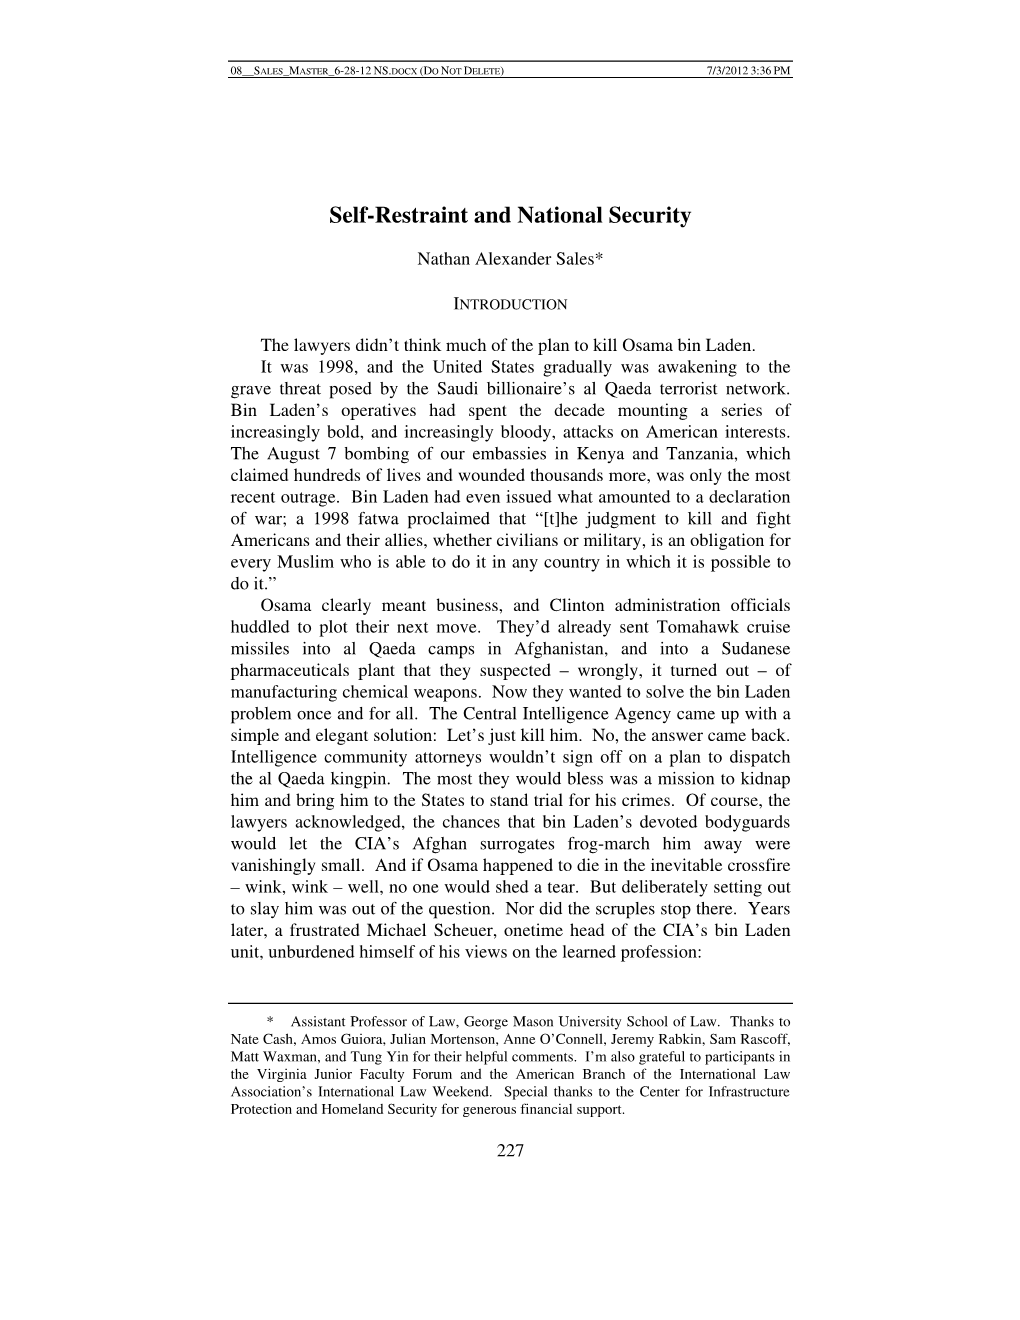 Self-Restraint and National Security